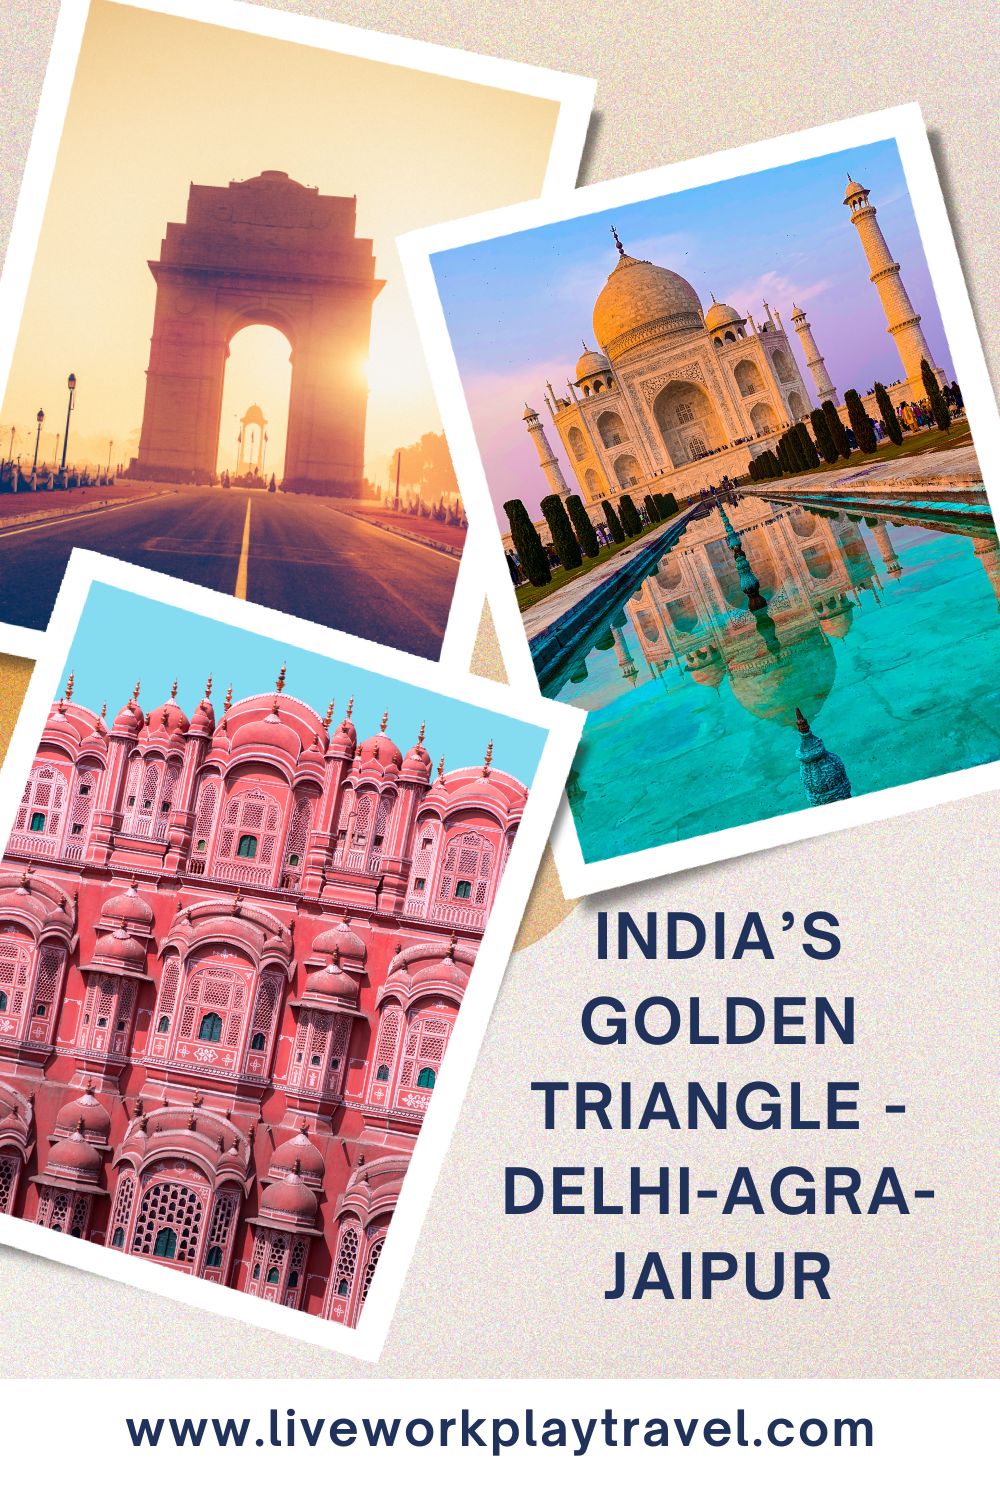 Delhi Gate, Taj Mahal and Pink Palace - 3 things to see in India's Golden Triangle.